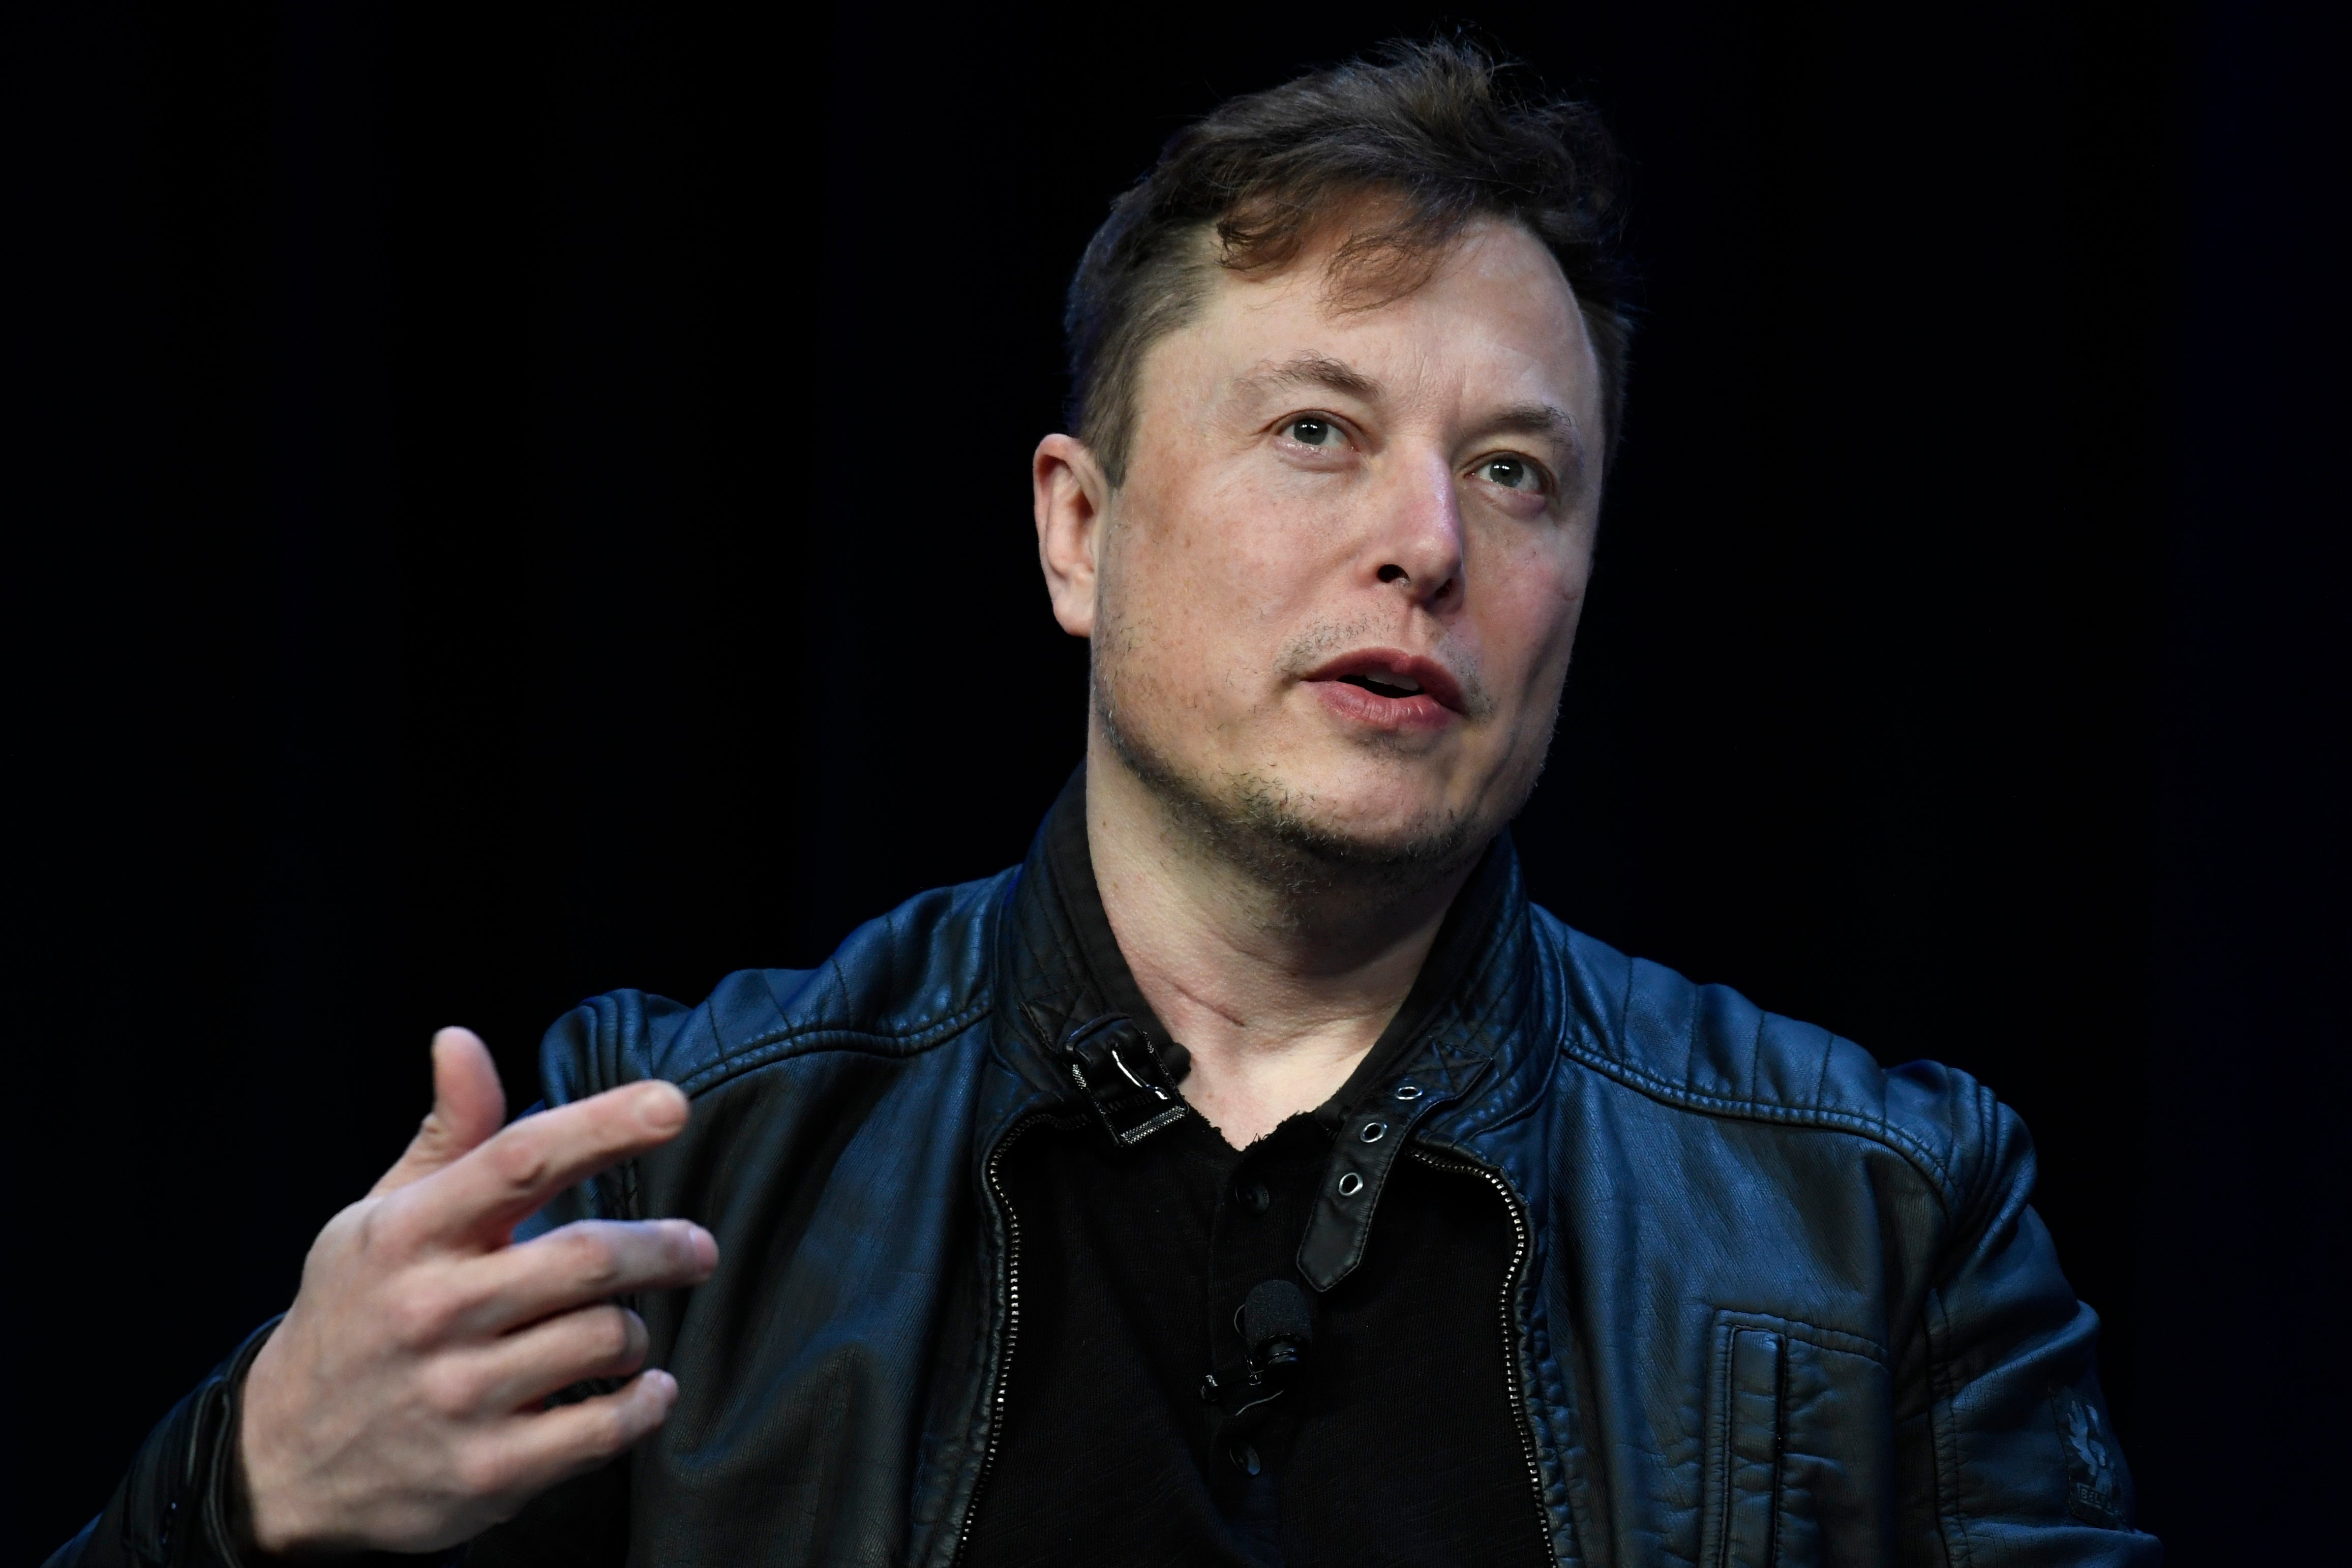 Musk says he's not stepping down as Tesla CEO, tells shareholders the